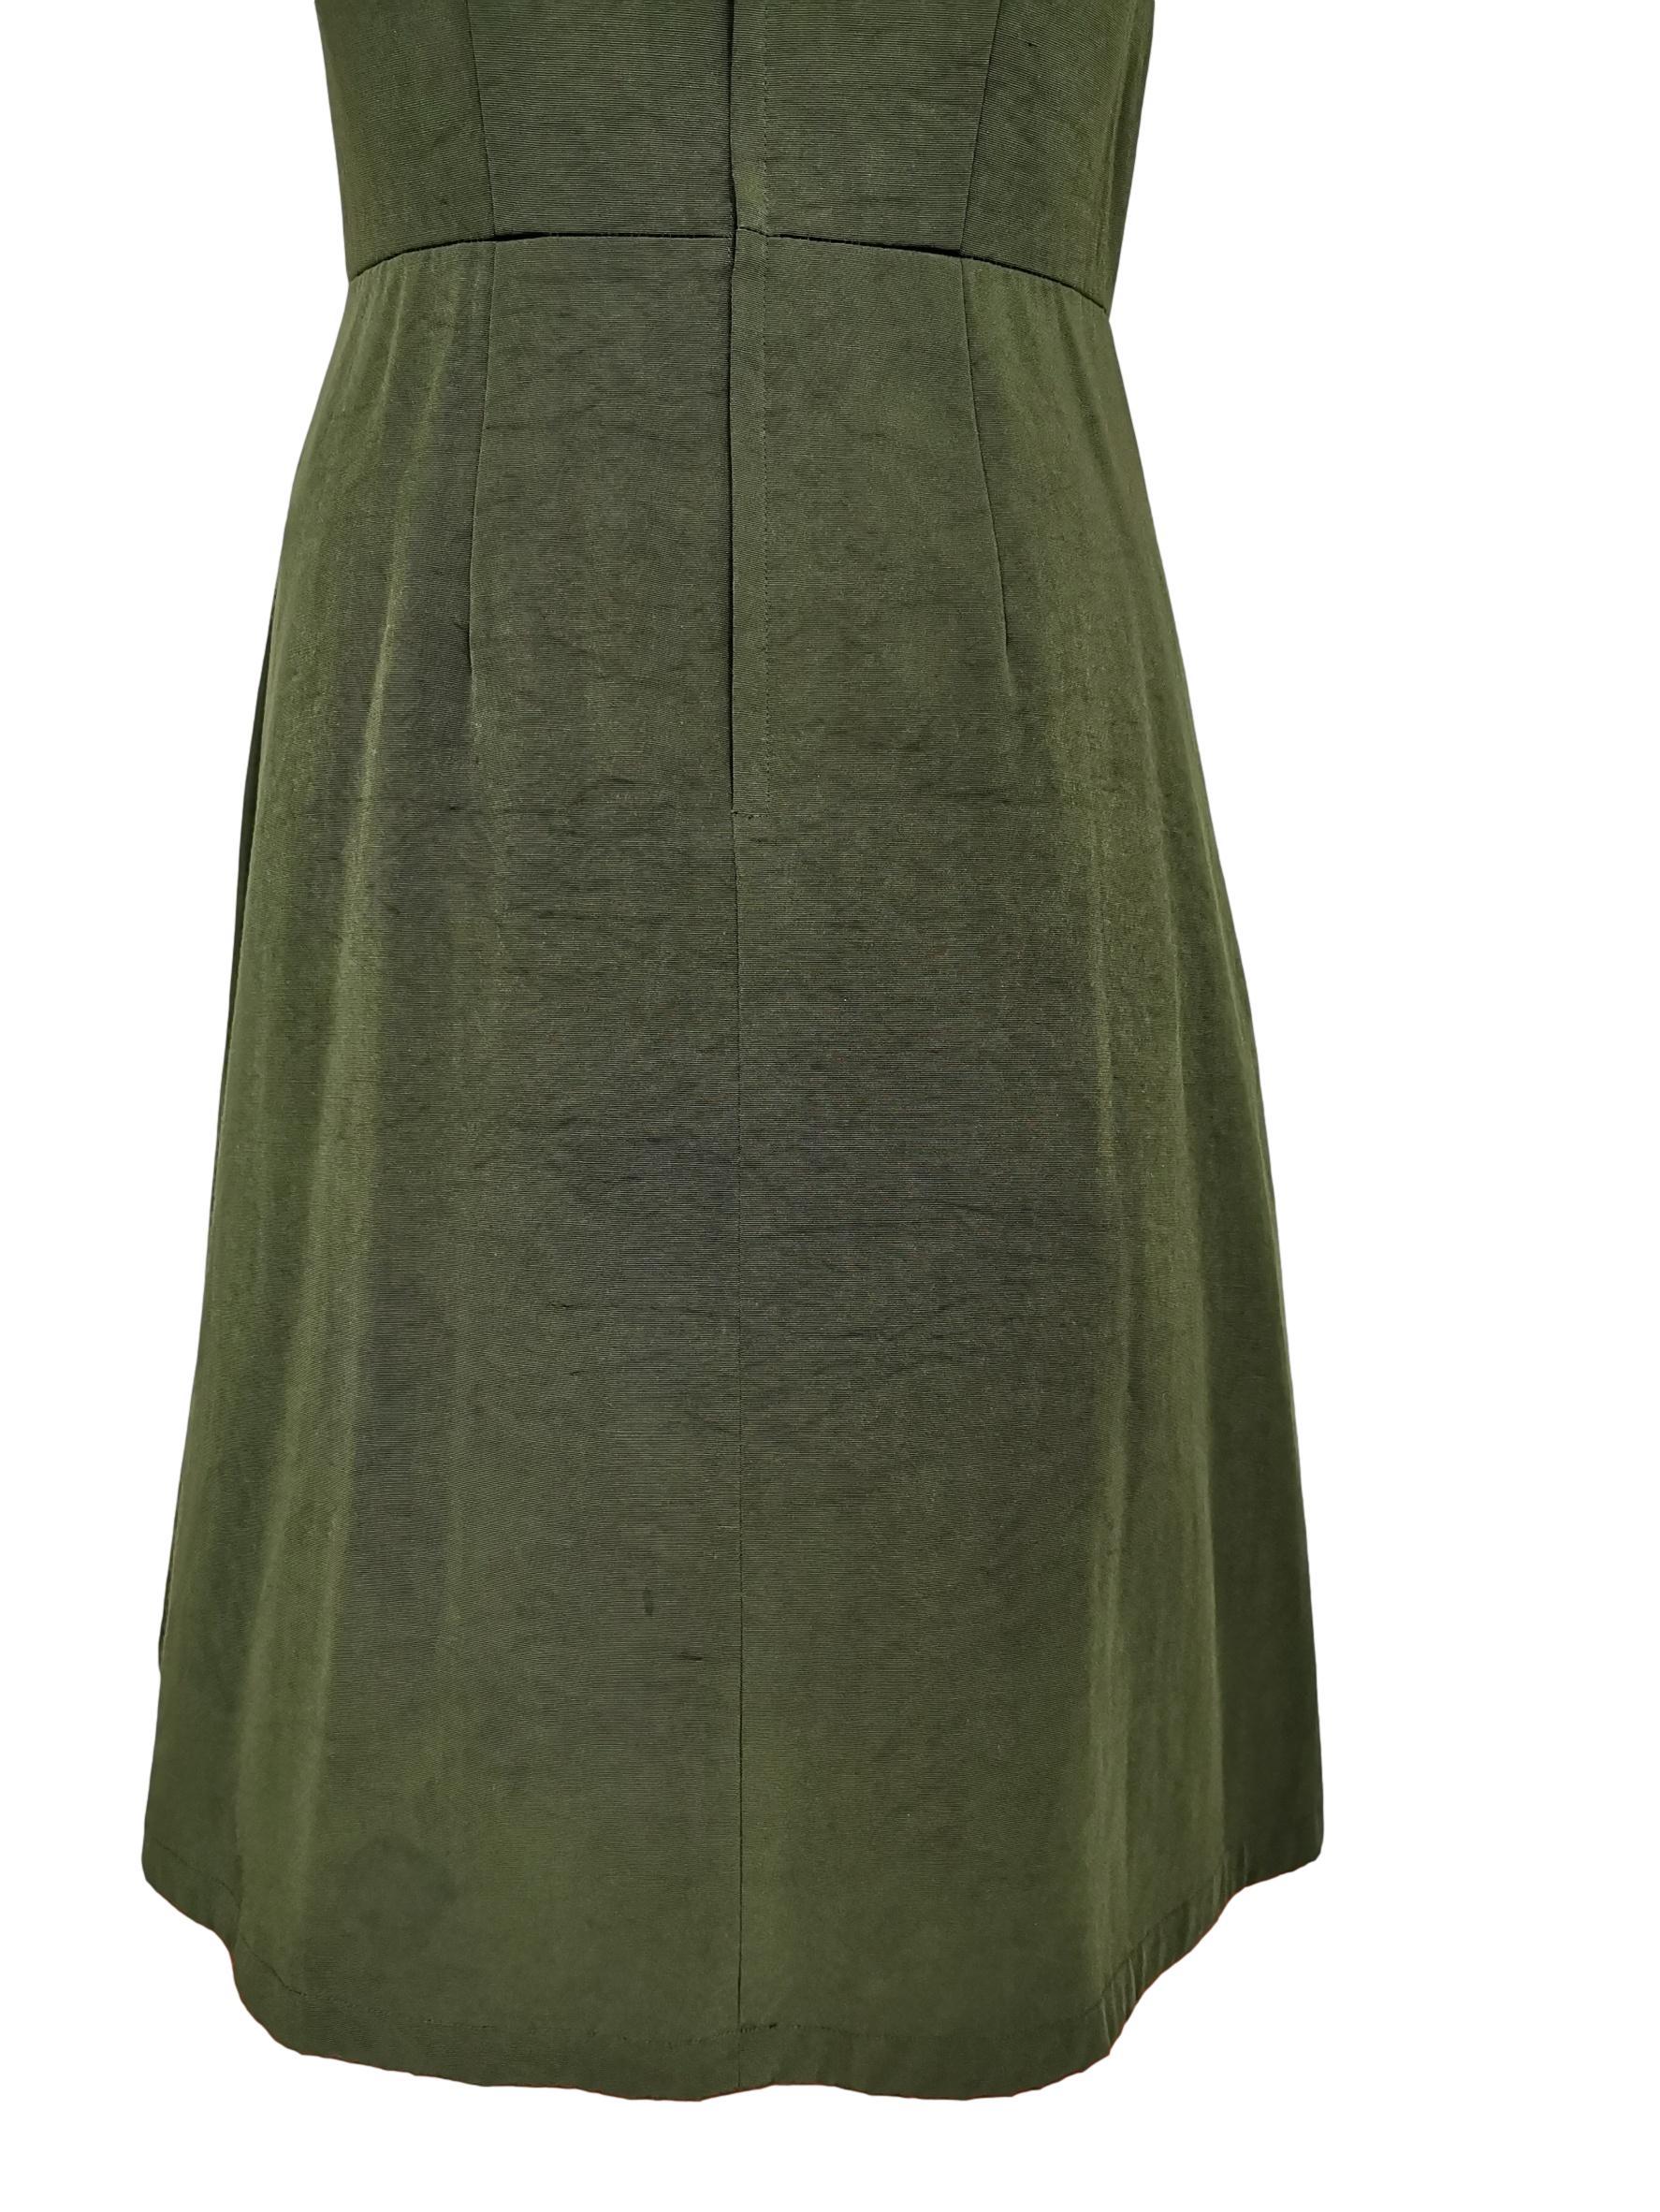 Comme des Garcons Army Green Dress AD 1999 For Sale 5